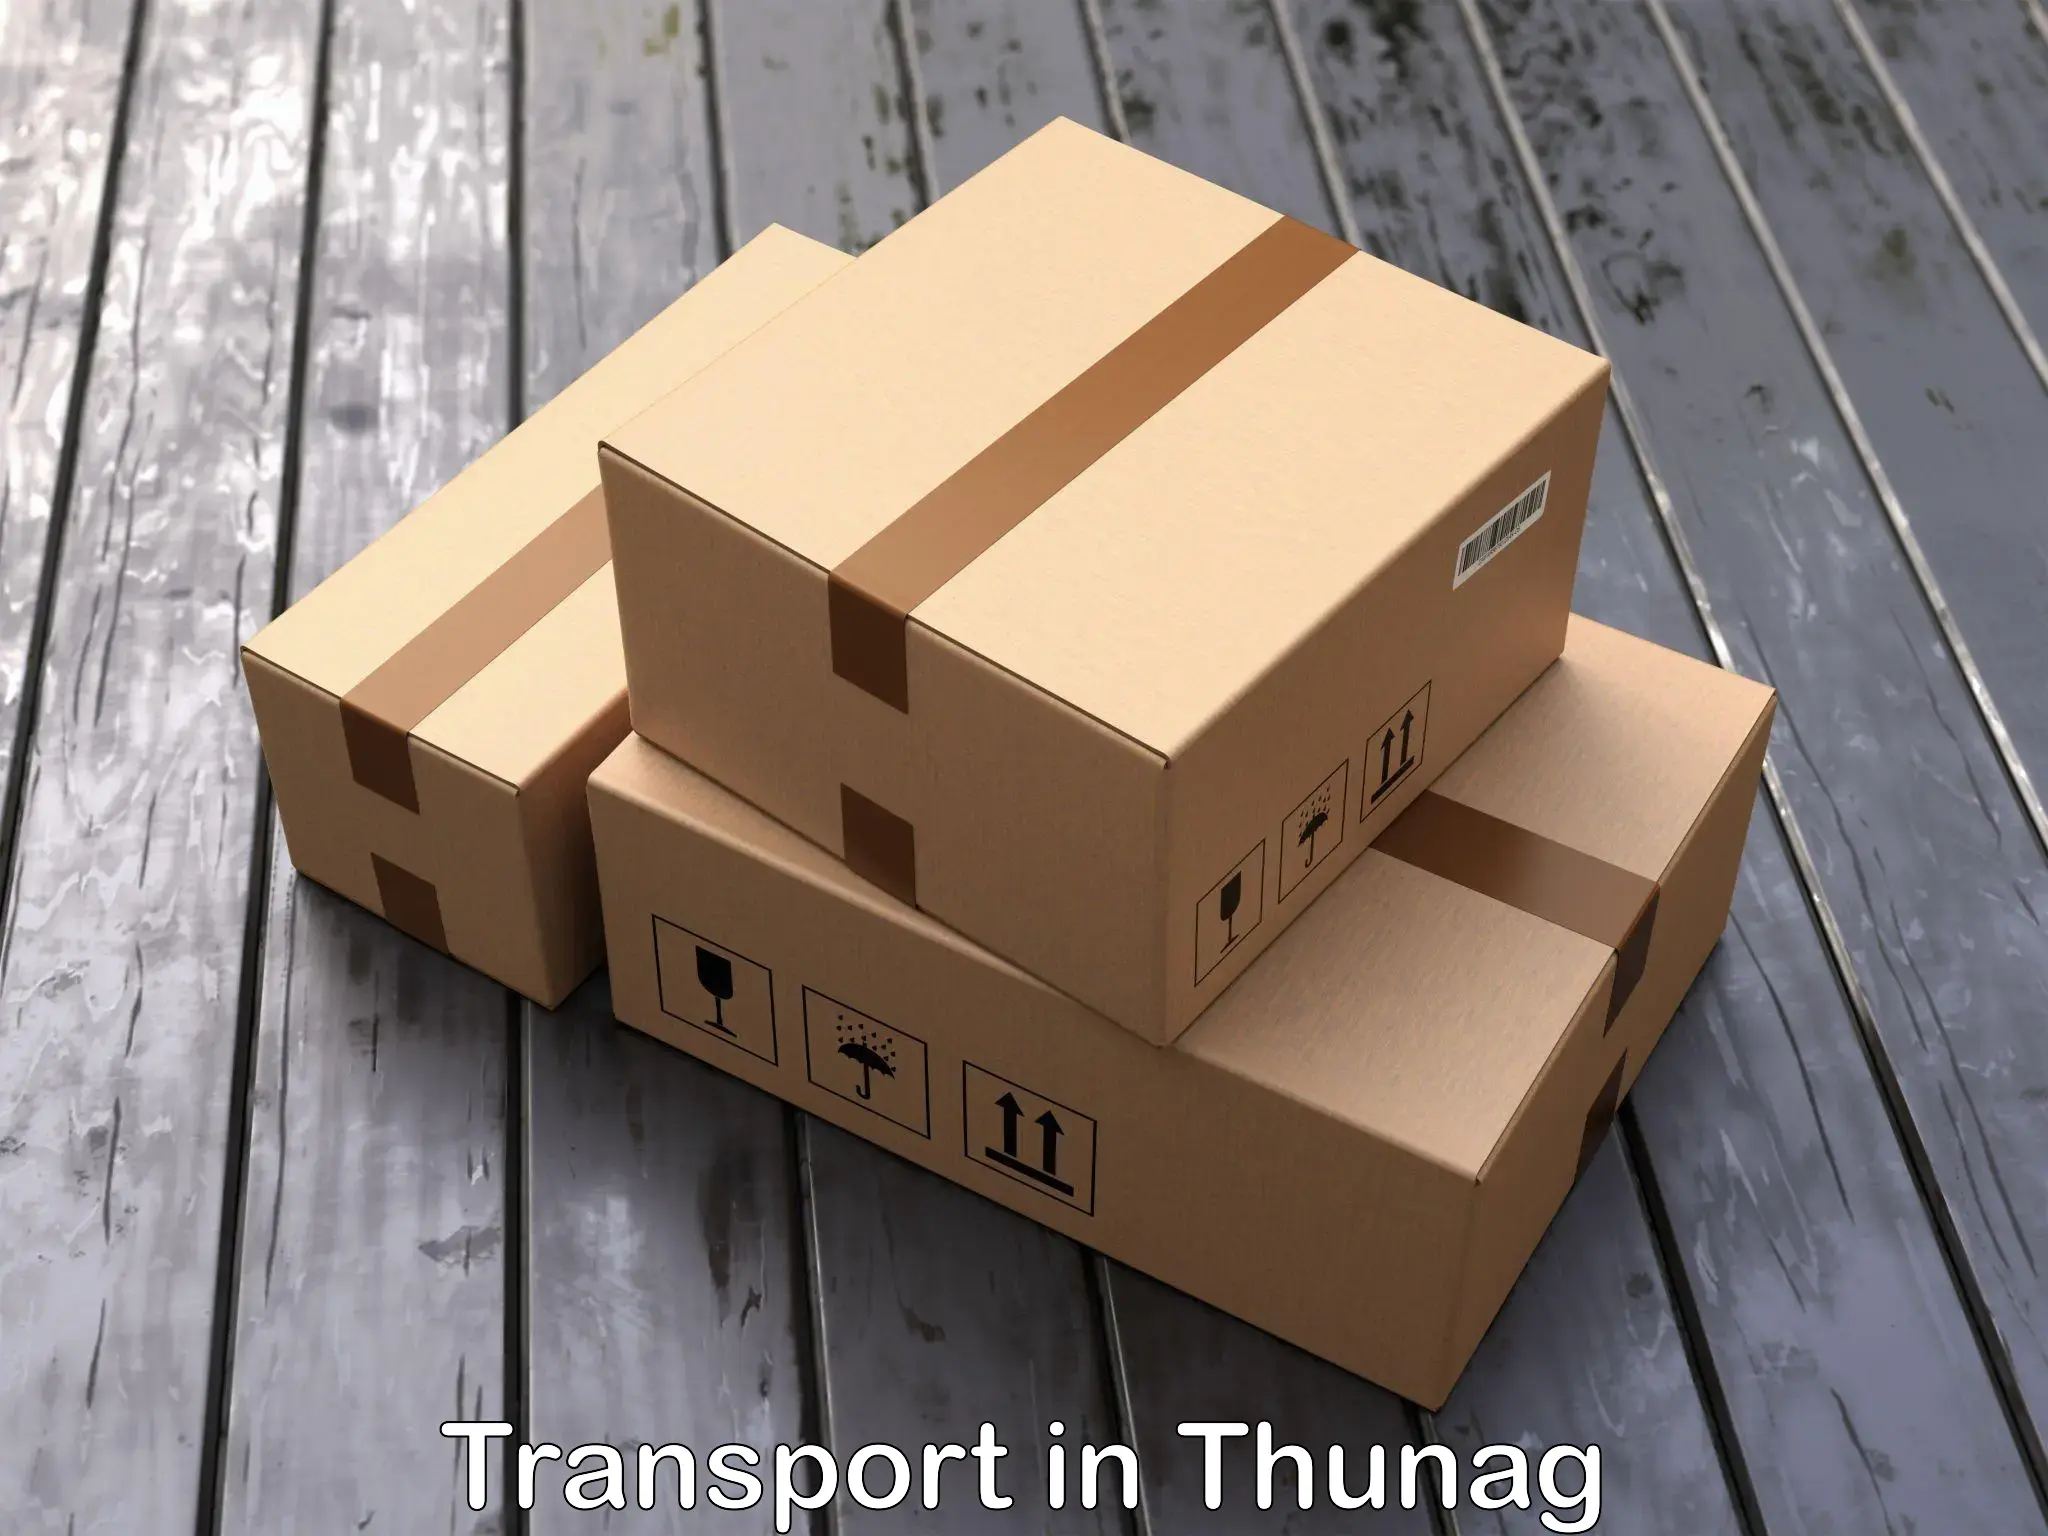 Daily parcel service transport in Thunag